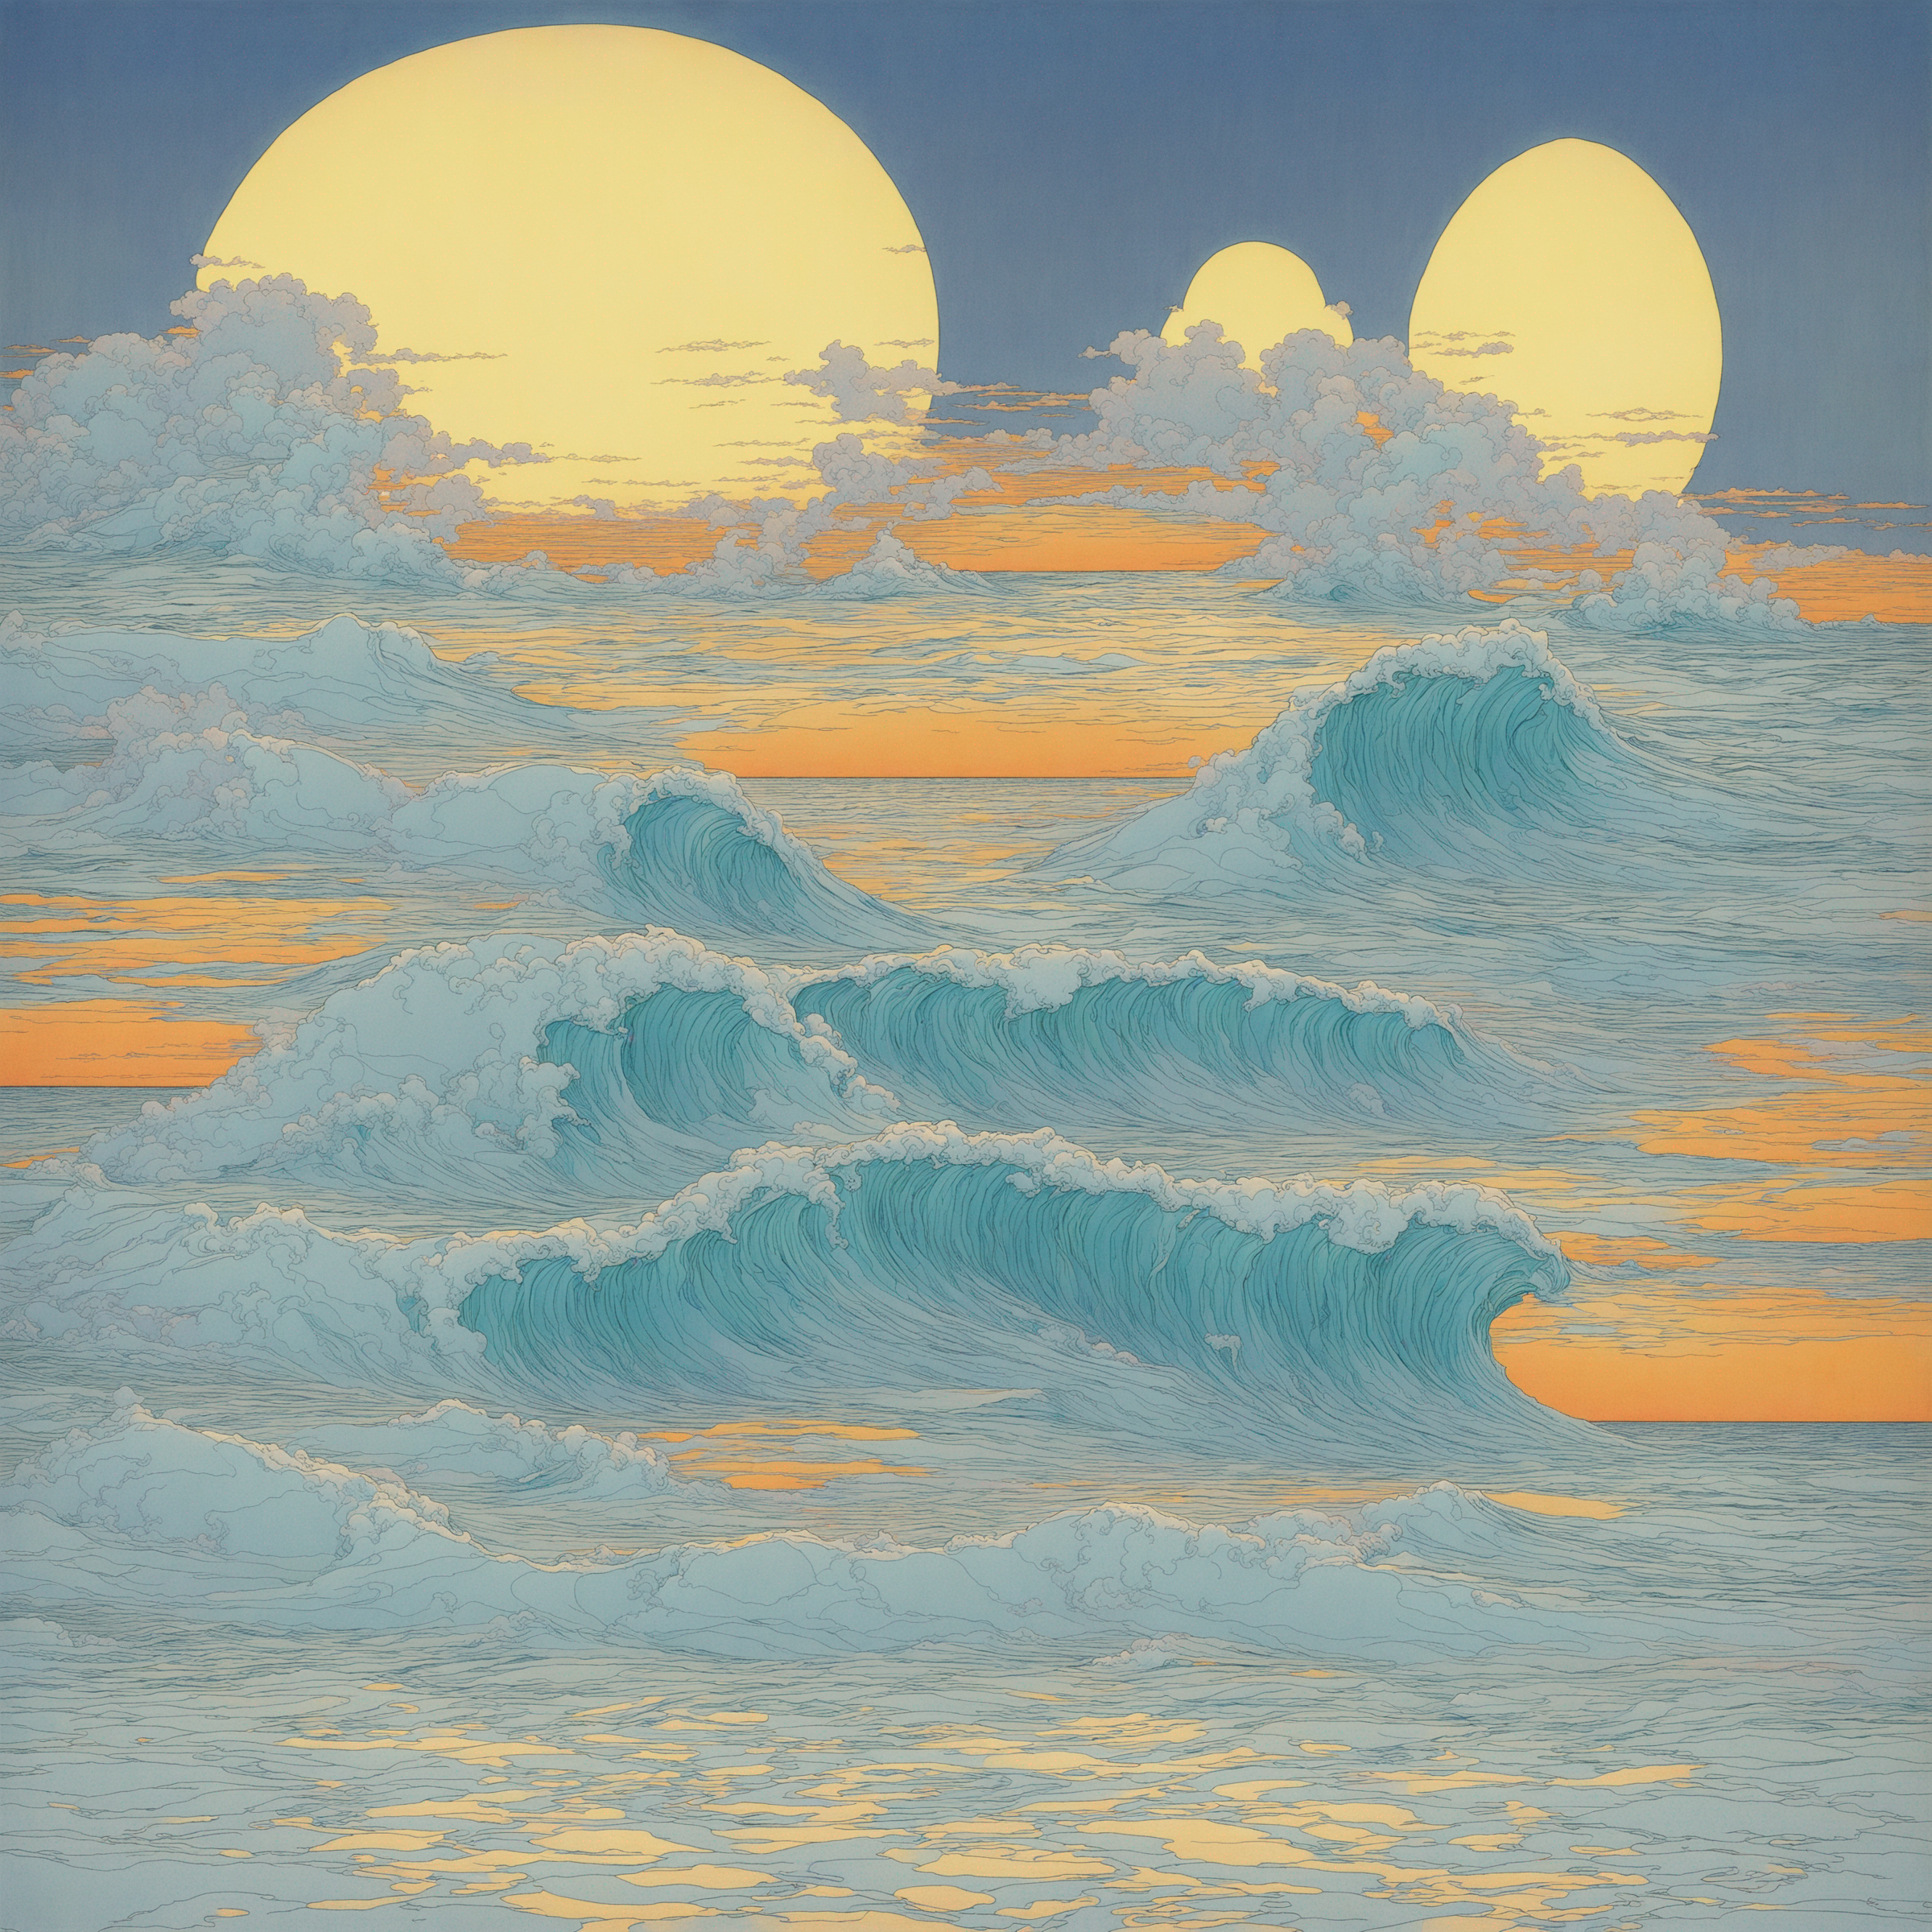 Ocean Swells, by moebius, Stable Diffusion XL 1.0